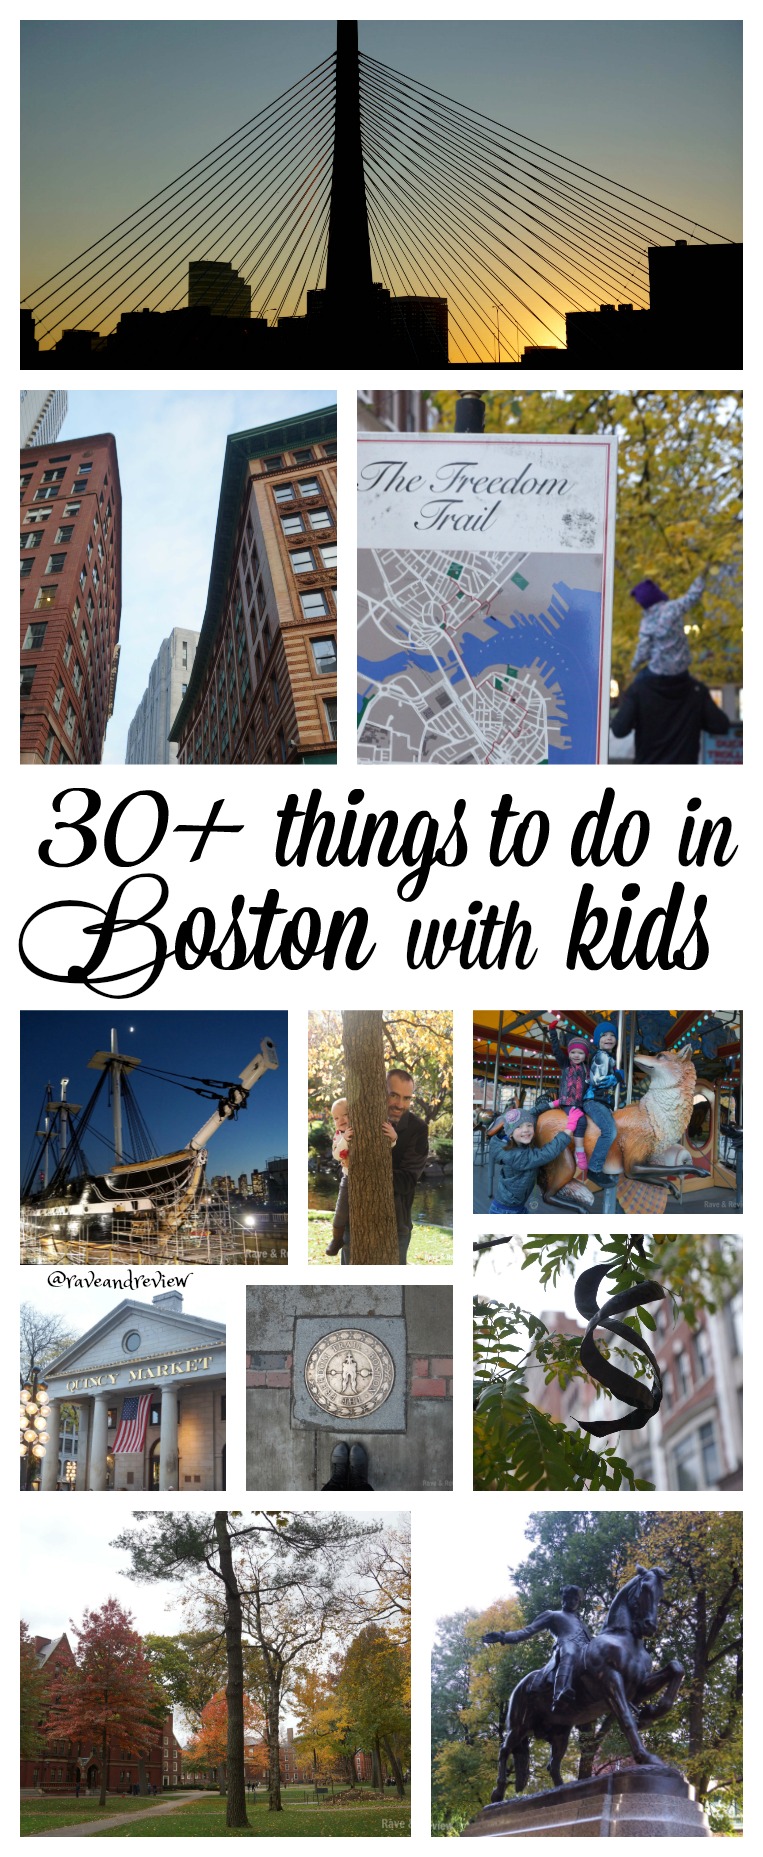 30 things to do in Boston with kids